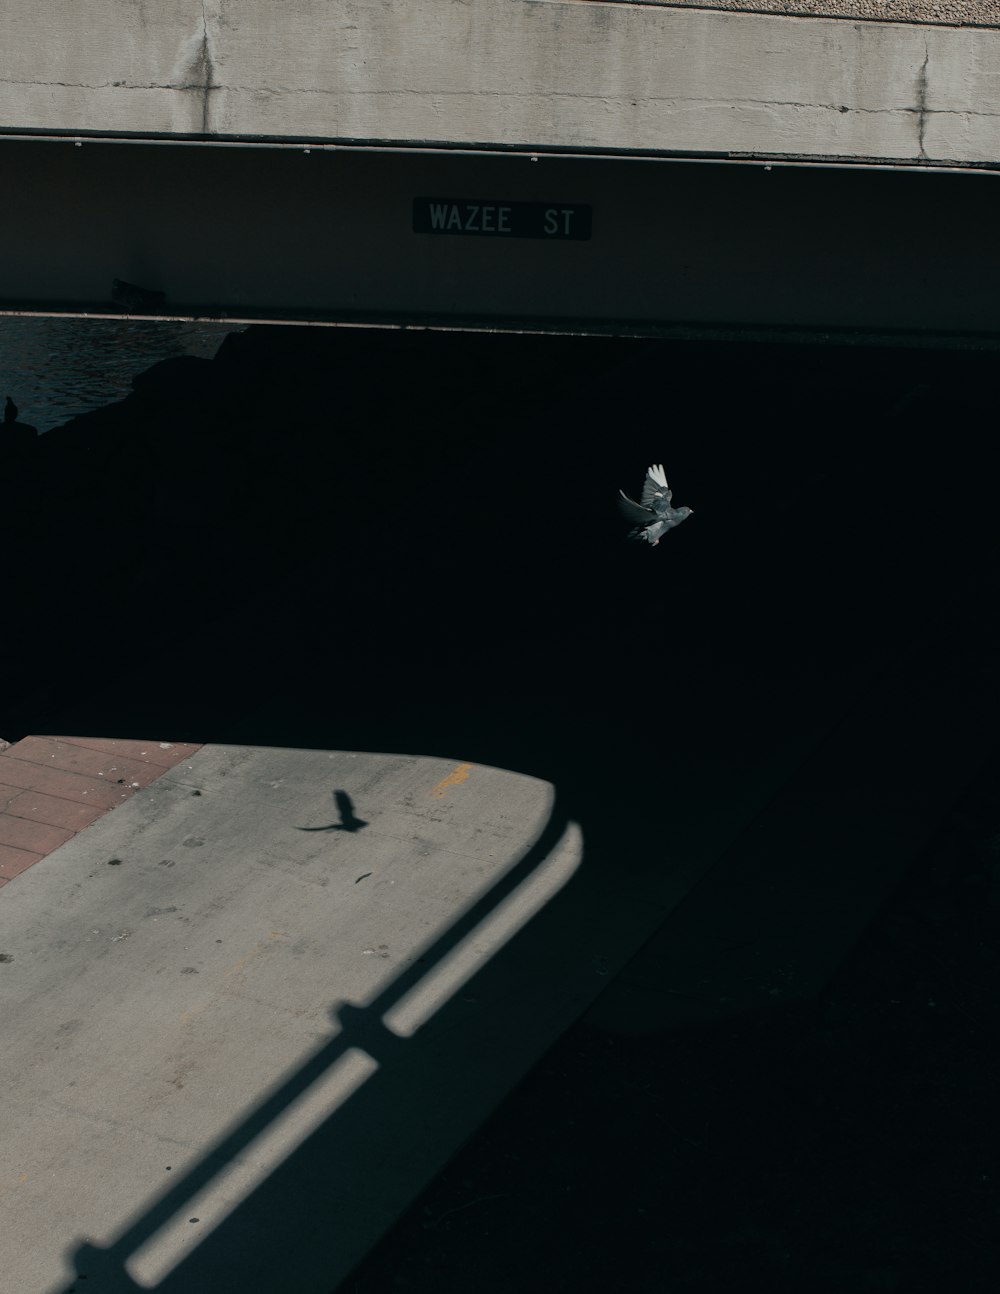 a bird flying under a bridge over a body of water